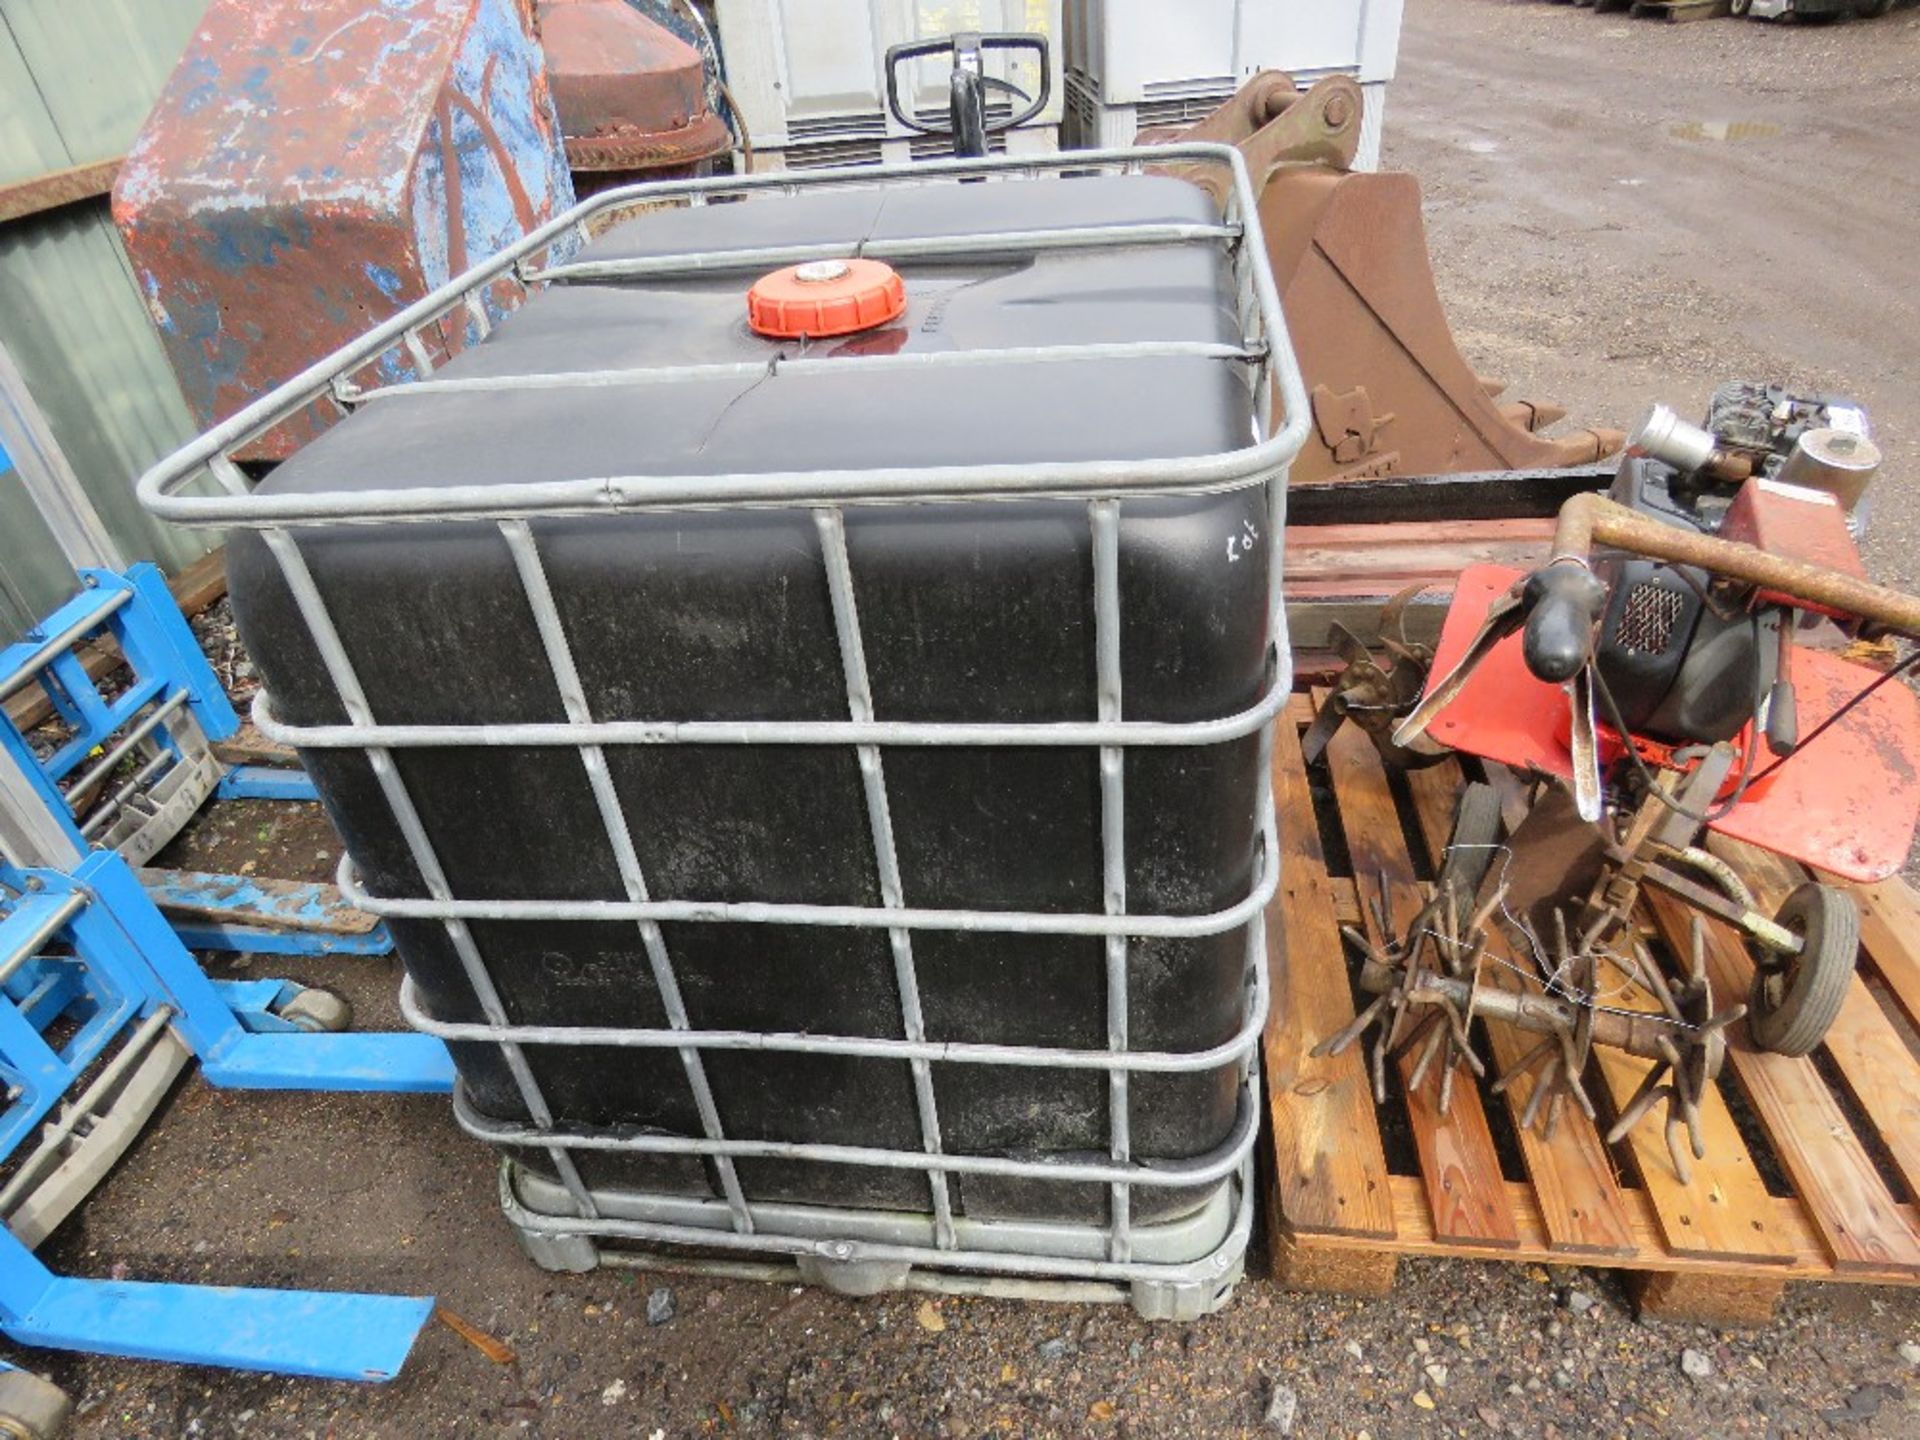 IBC STORAGE CONTAINER ON PALLET. THIS LOT IS SOLD UNDER THE AUCTIONEERS MARGIN SCHEME, THEREFORE NO